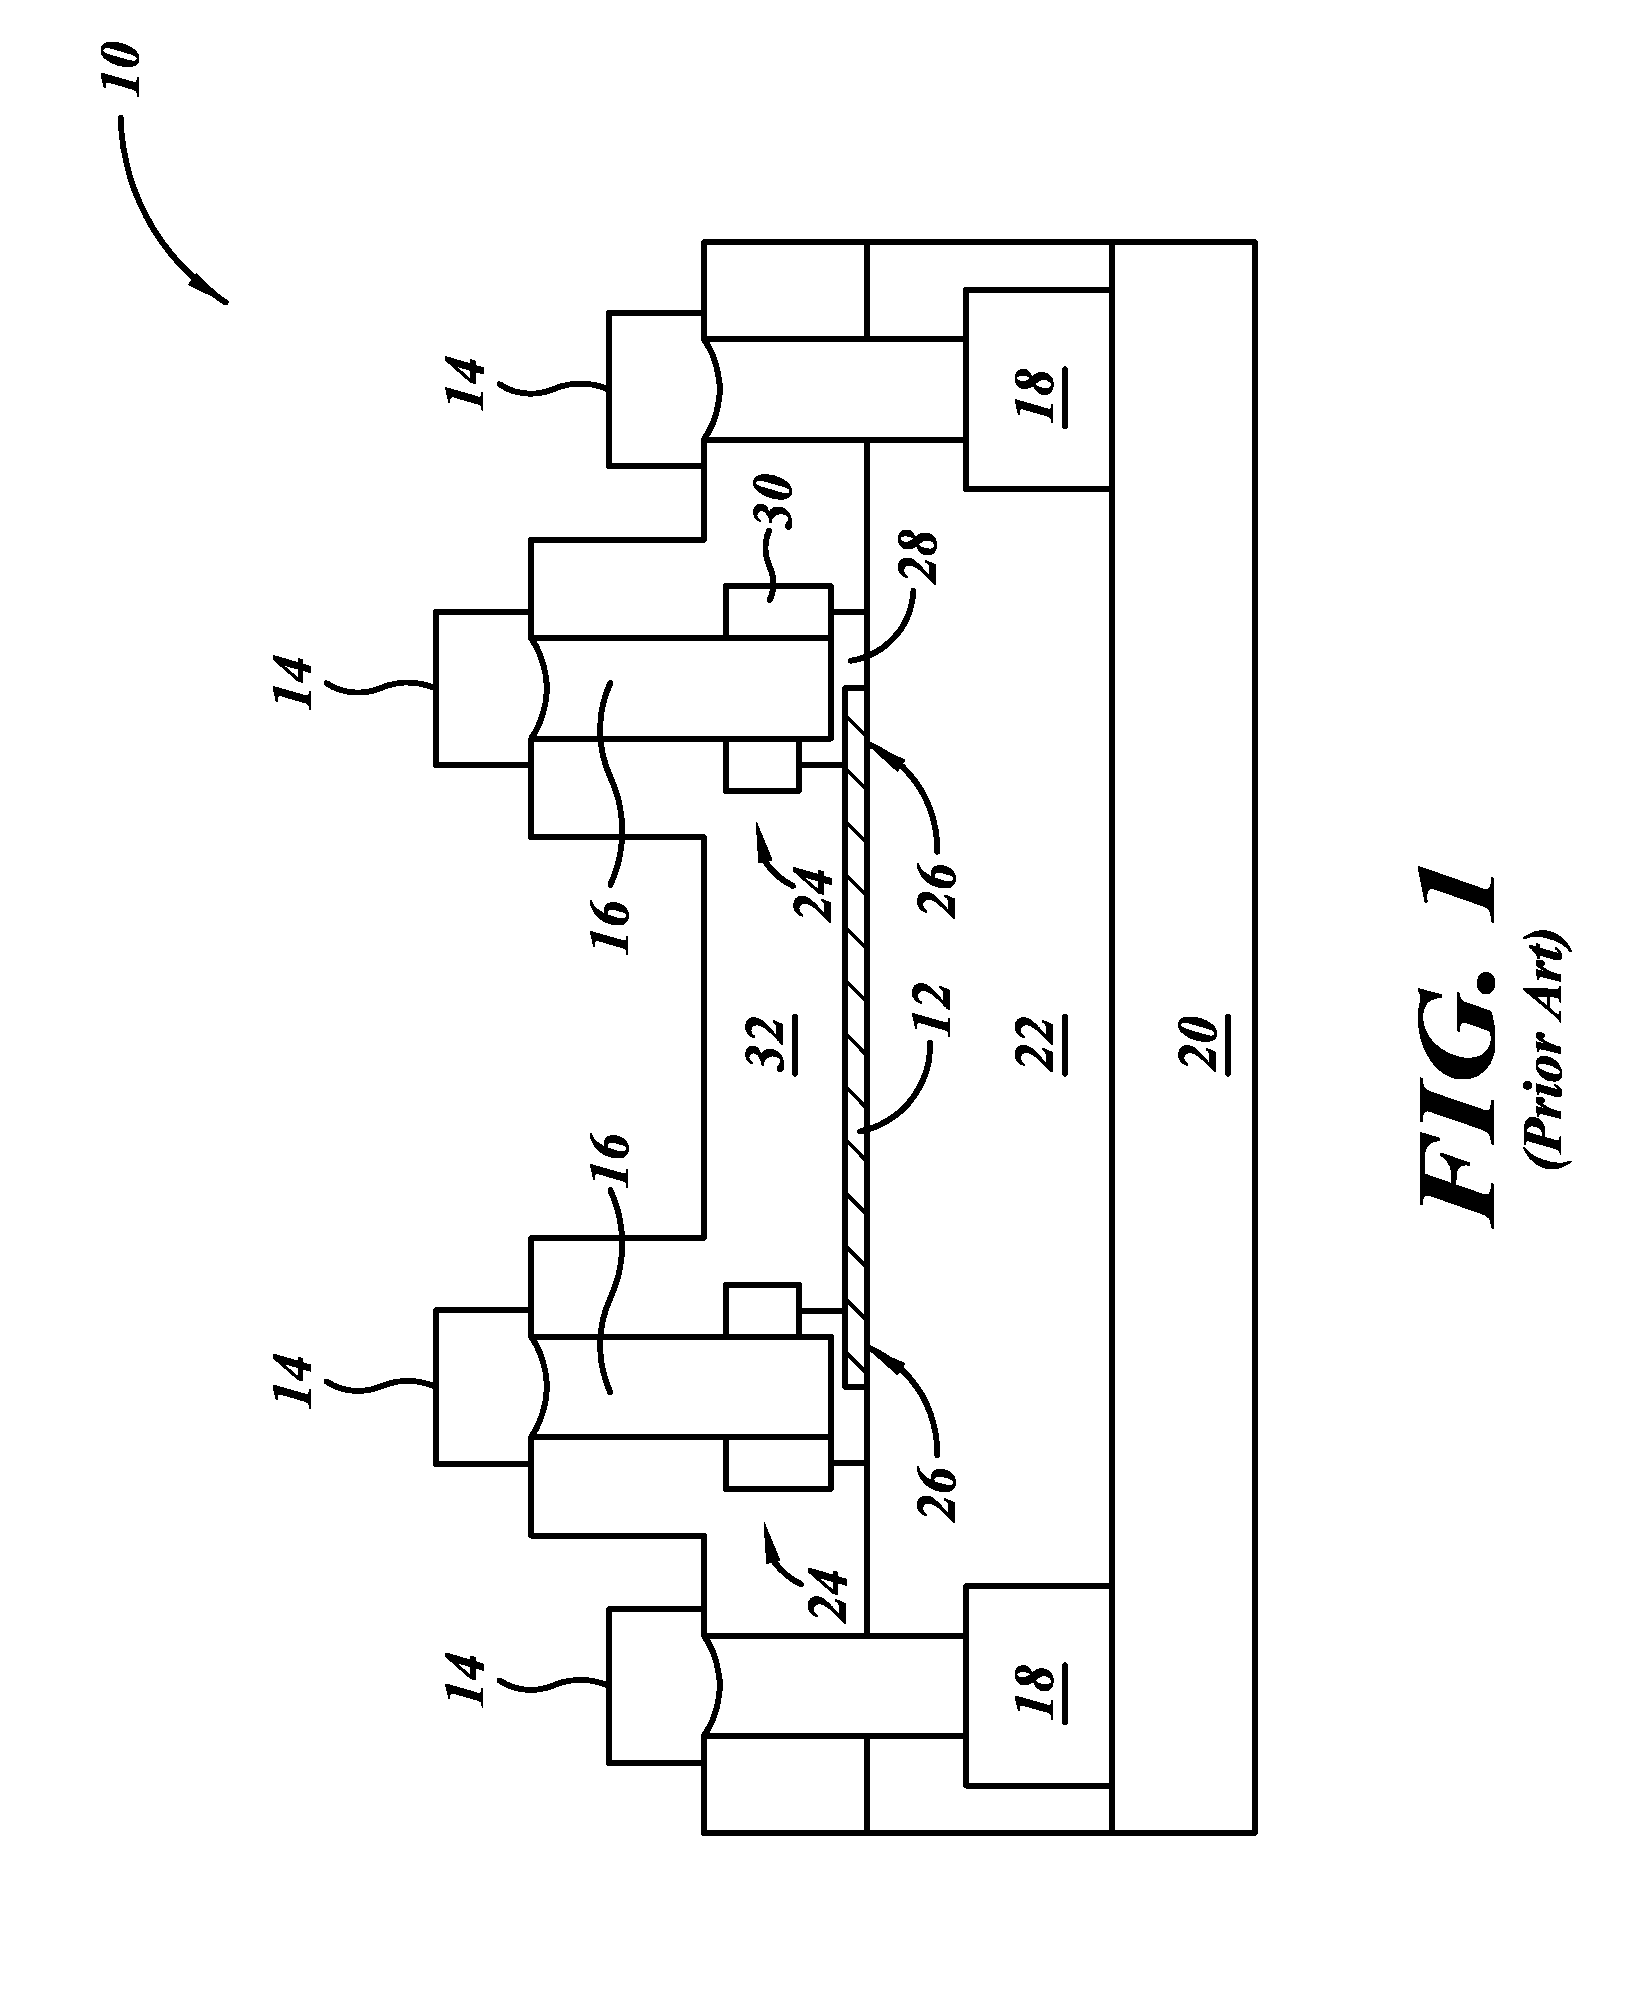 Via-less thin film resistor with a dielectric cap